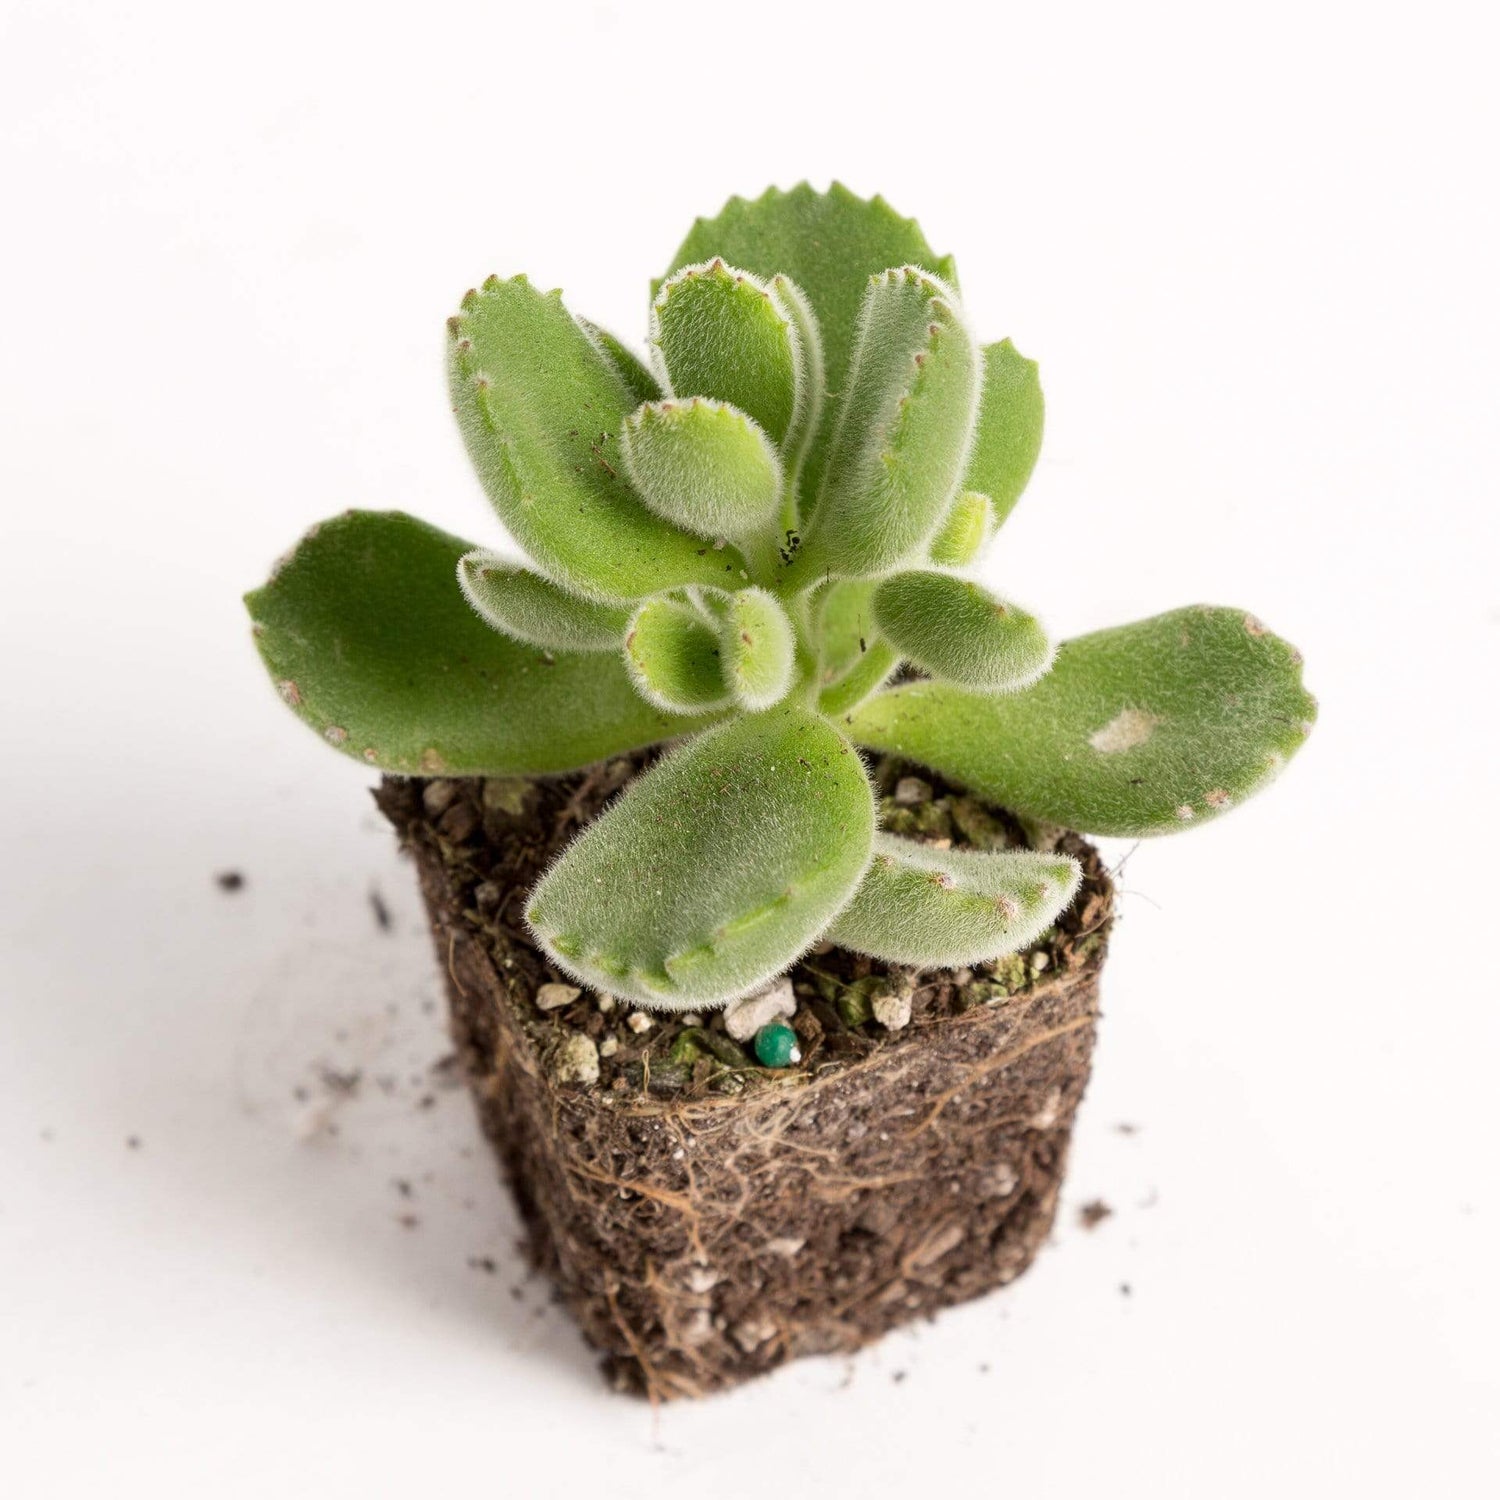 Urban Sprouts Plant 2" in nursery pot Succulent 'Bear's Paw'